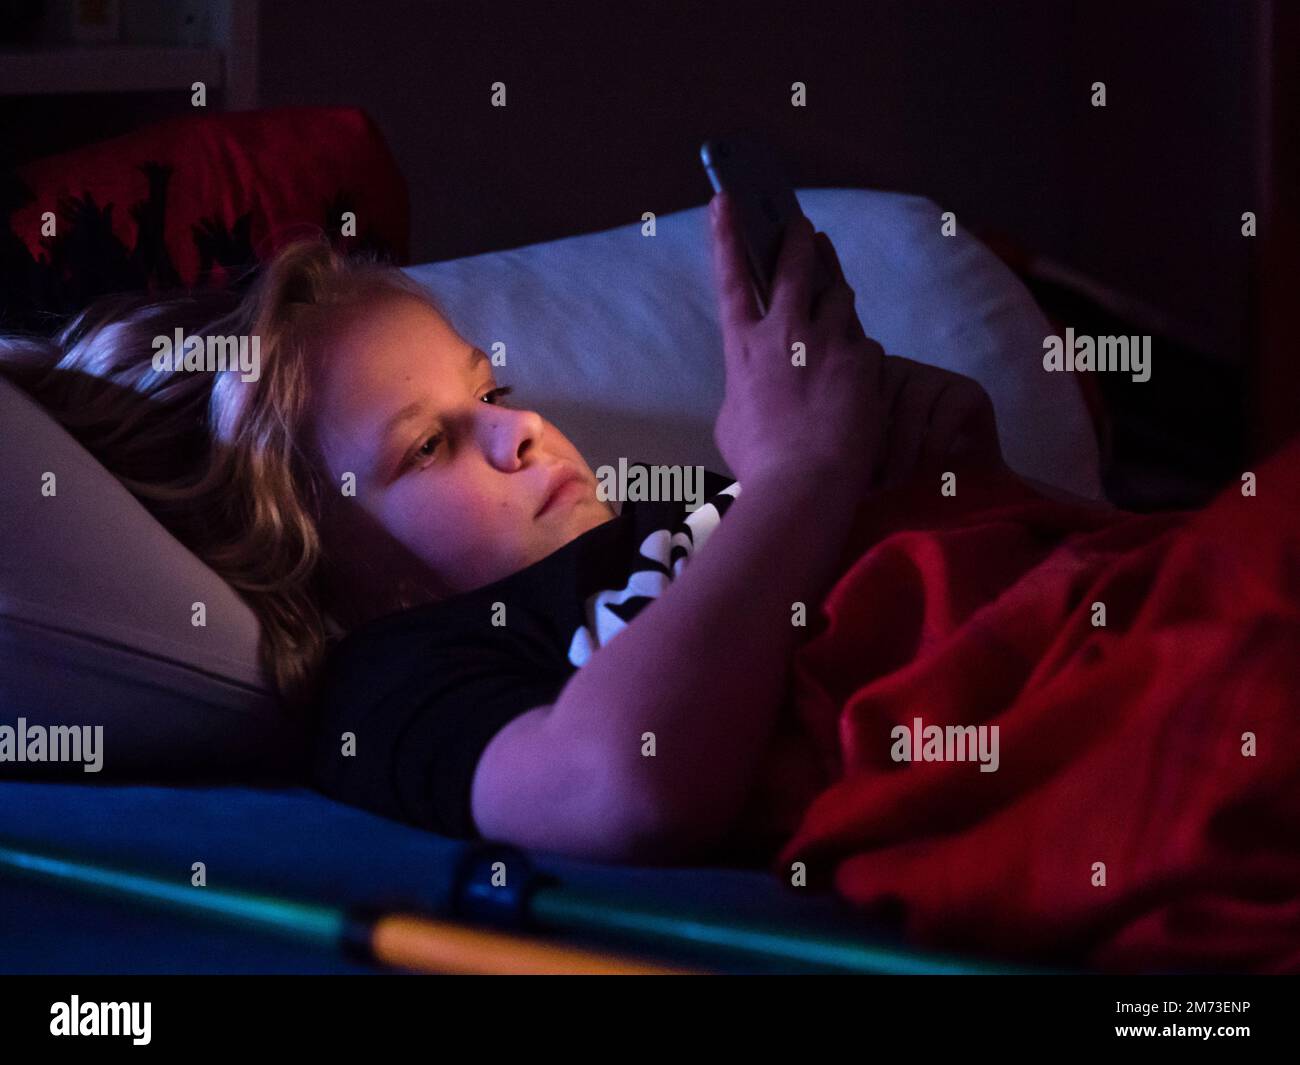 A teenage boy is lying in bed holding his smartphone before falling asleep. Smartphone display is illuminating boy's face. Caucasian ethnicity. Stock Photo